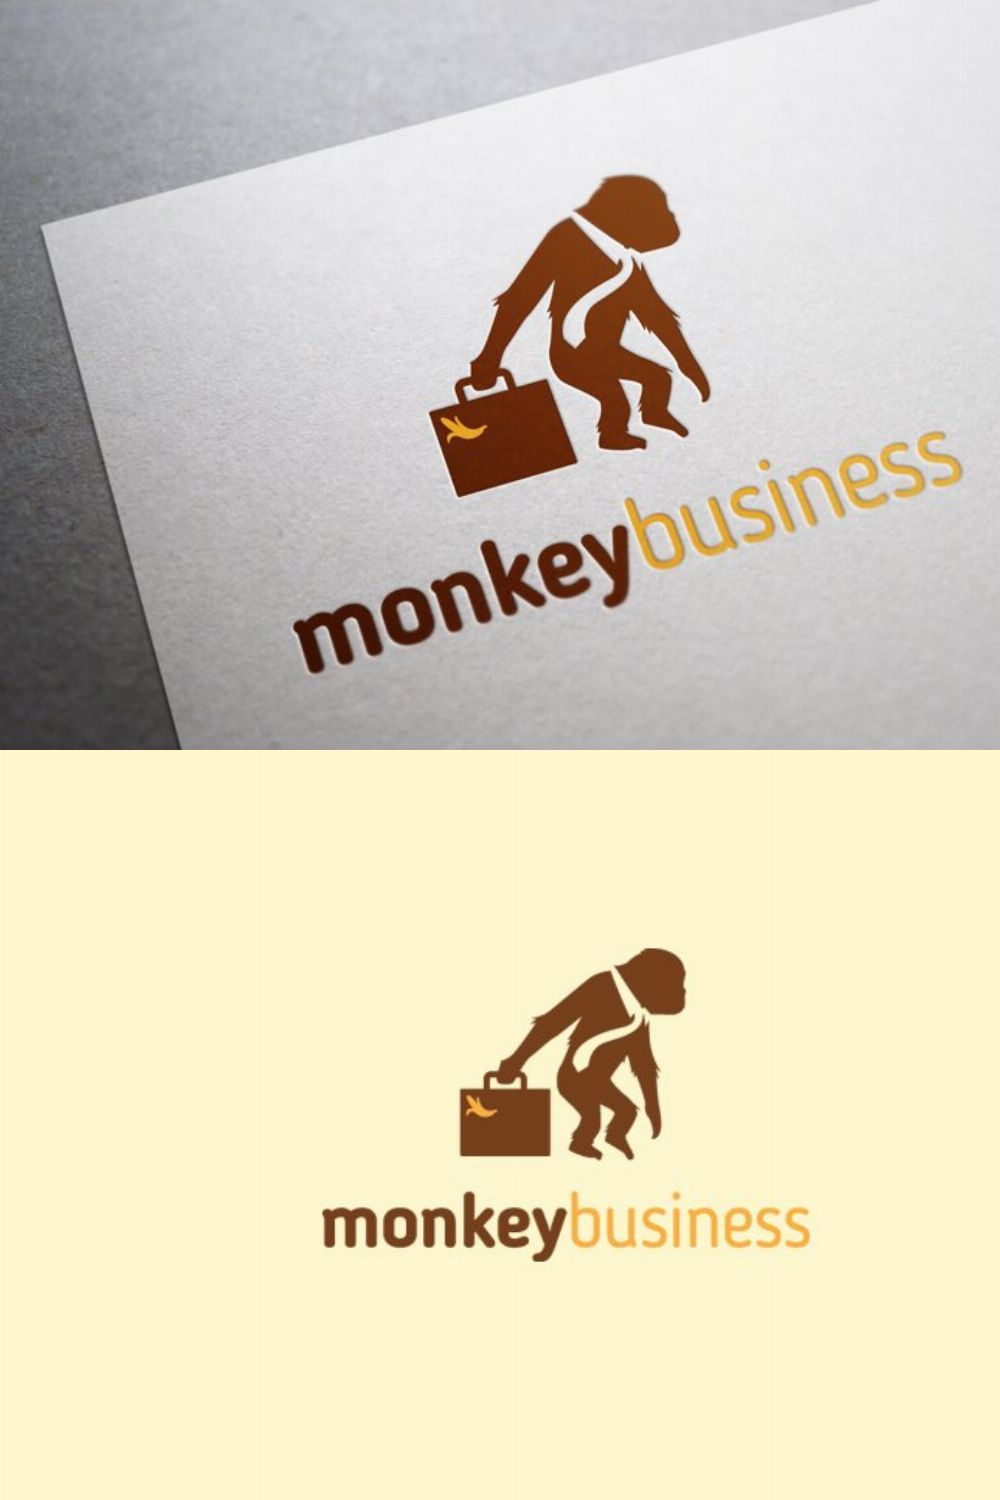 Monkey business pinterest preview image.